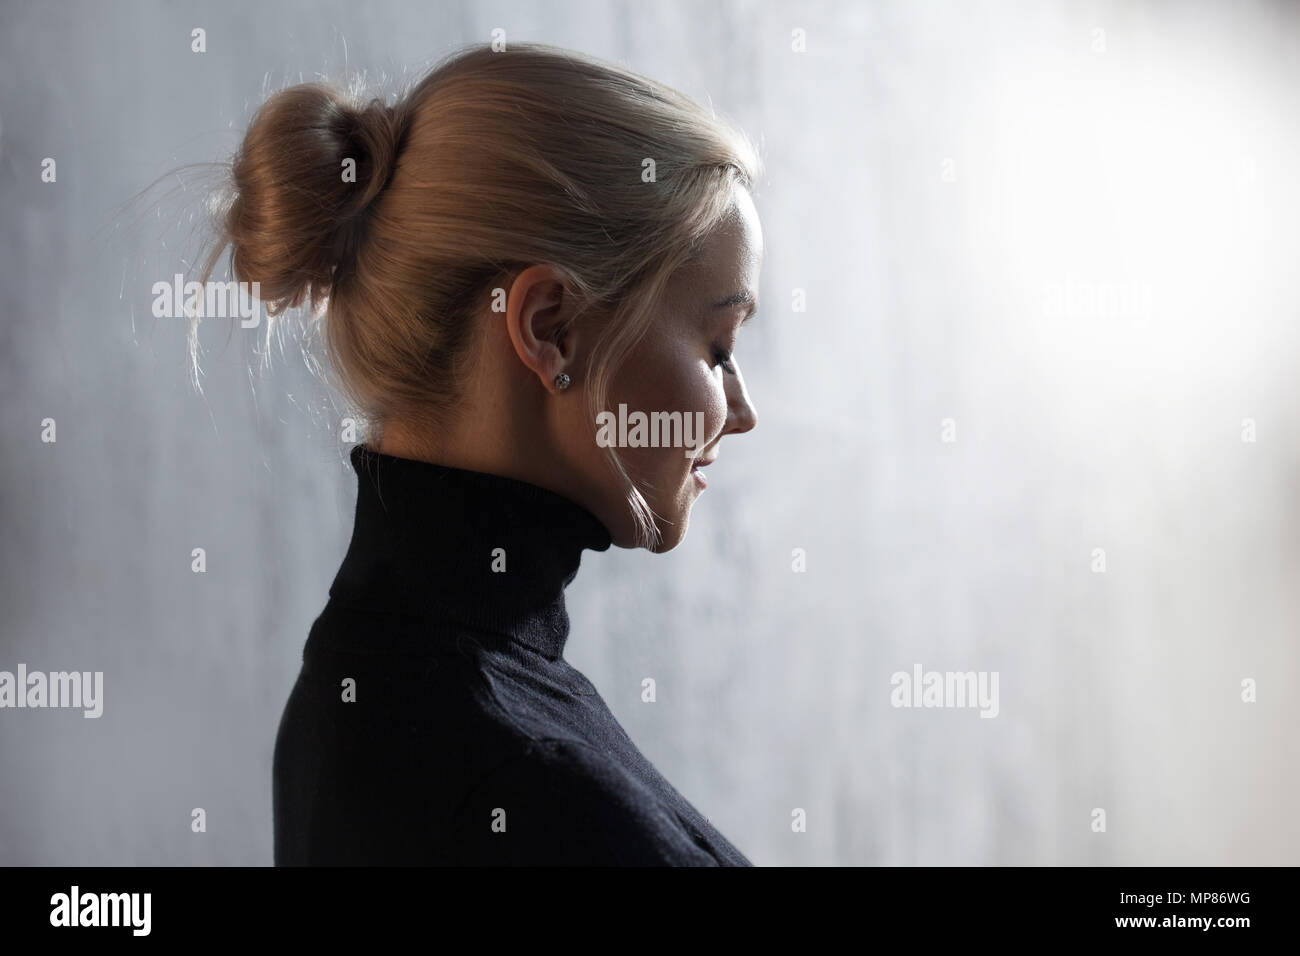 Portrait of beautiful blonde woman. Calm and self-confidence. Beautiful adult girl in black turtleneck, gray background. Stock Photo